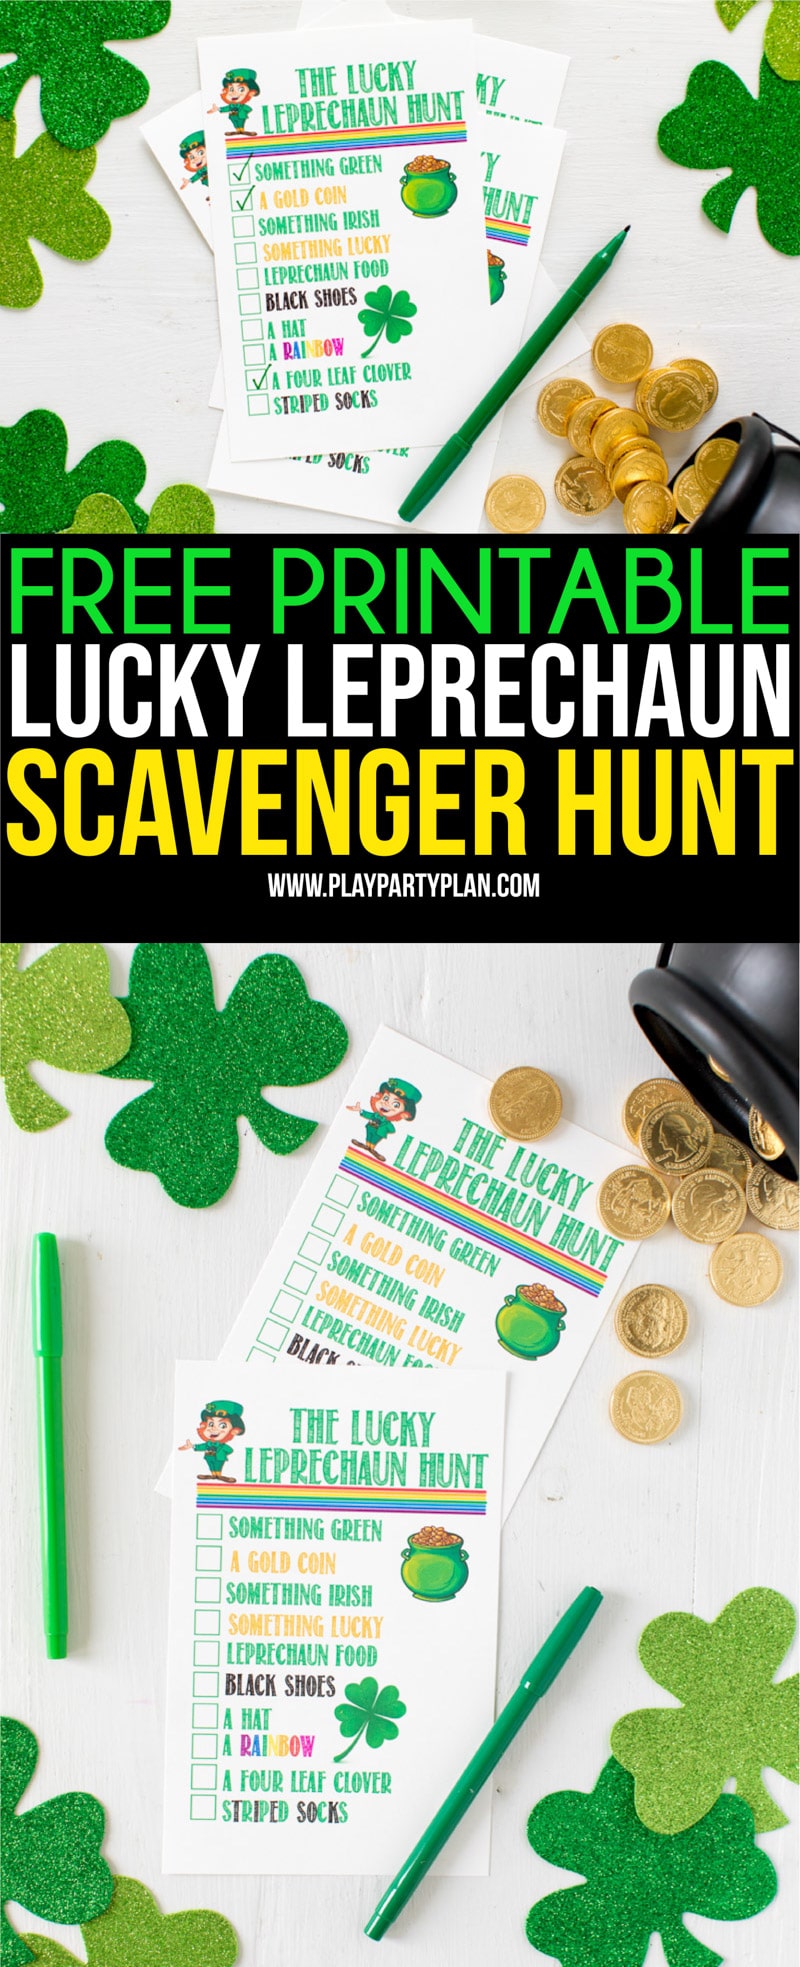 Fun Lucky Leprechaun Games for St. Patrick's Day Play Party Plan